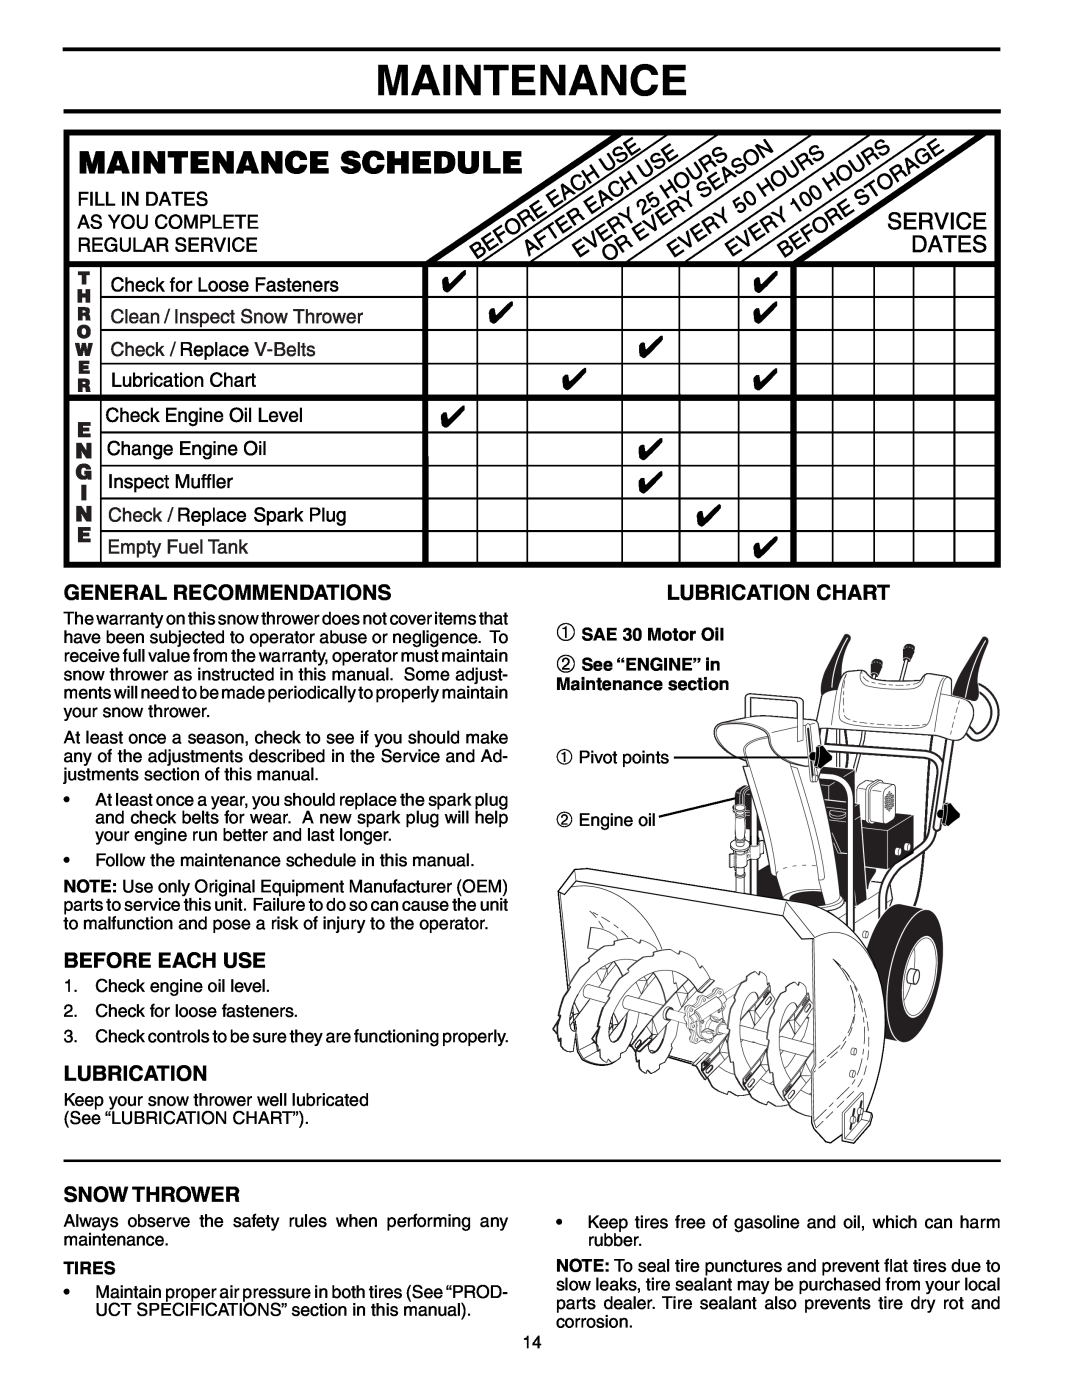 Poulan PP524B Maintenance, General Recommendations, Before Each Use, Snow Thrower, Lubrication Chart, Tires 